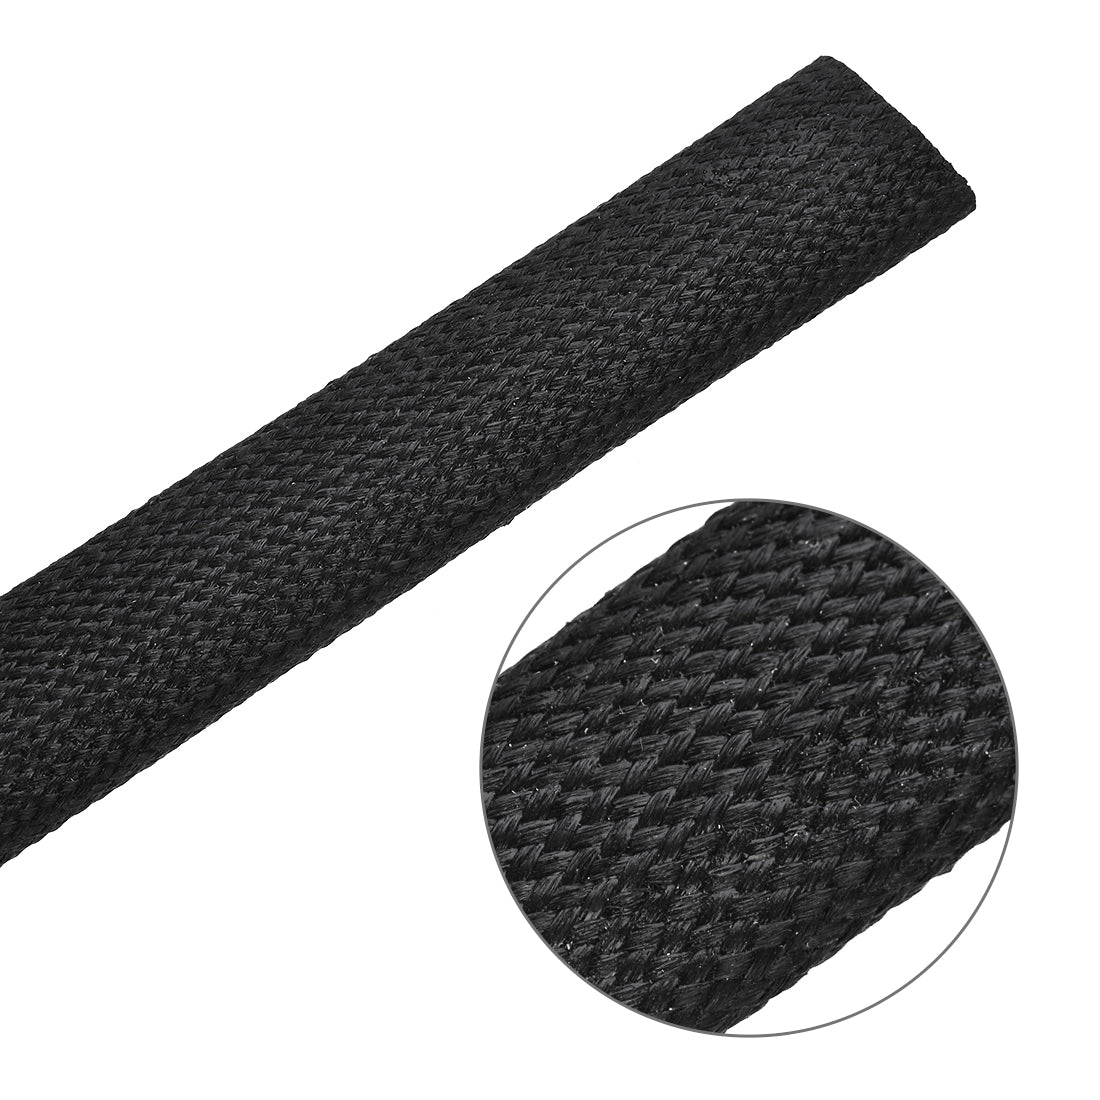 uxcell Uxcell Insulation Cable Protector,9.8Ft-16mm High TEMP Silicone Fiberglass Sleeve Black